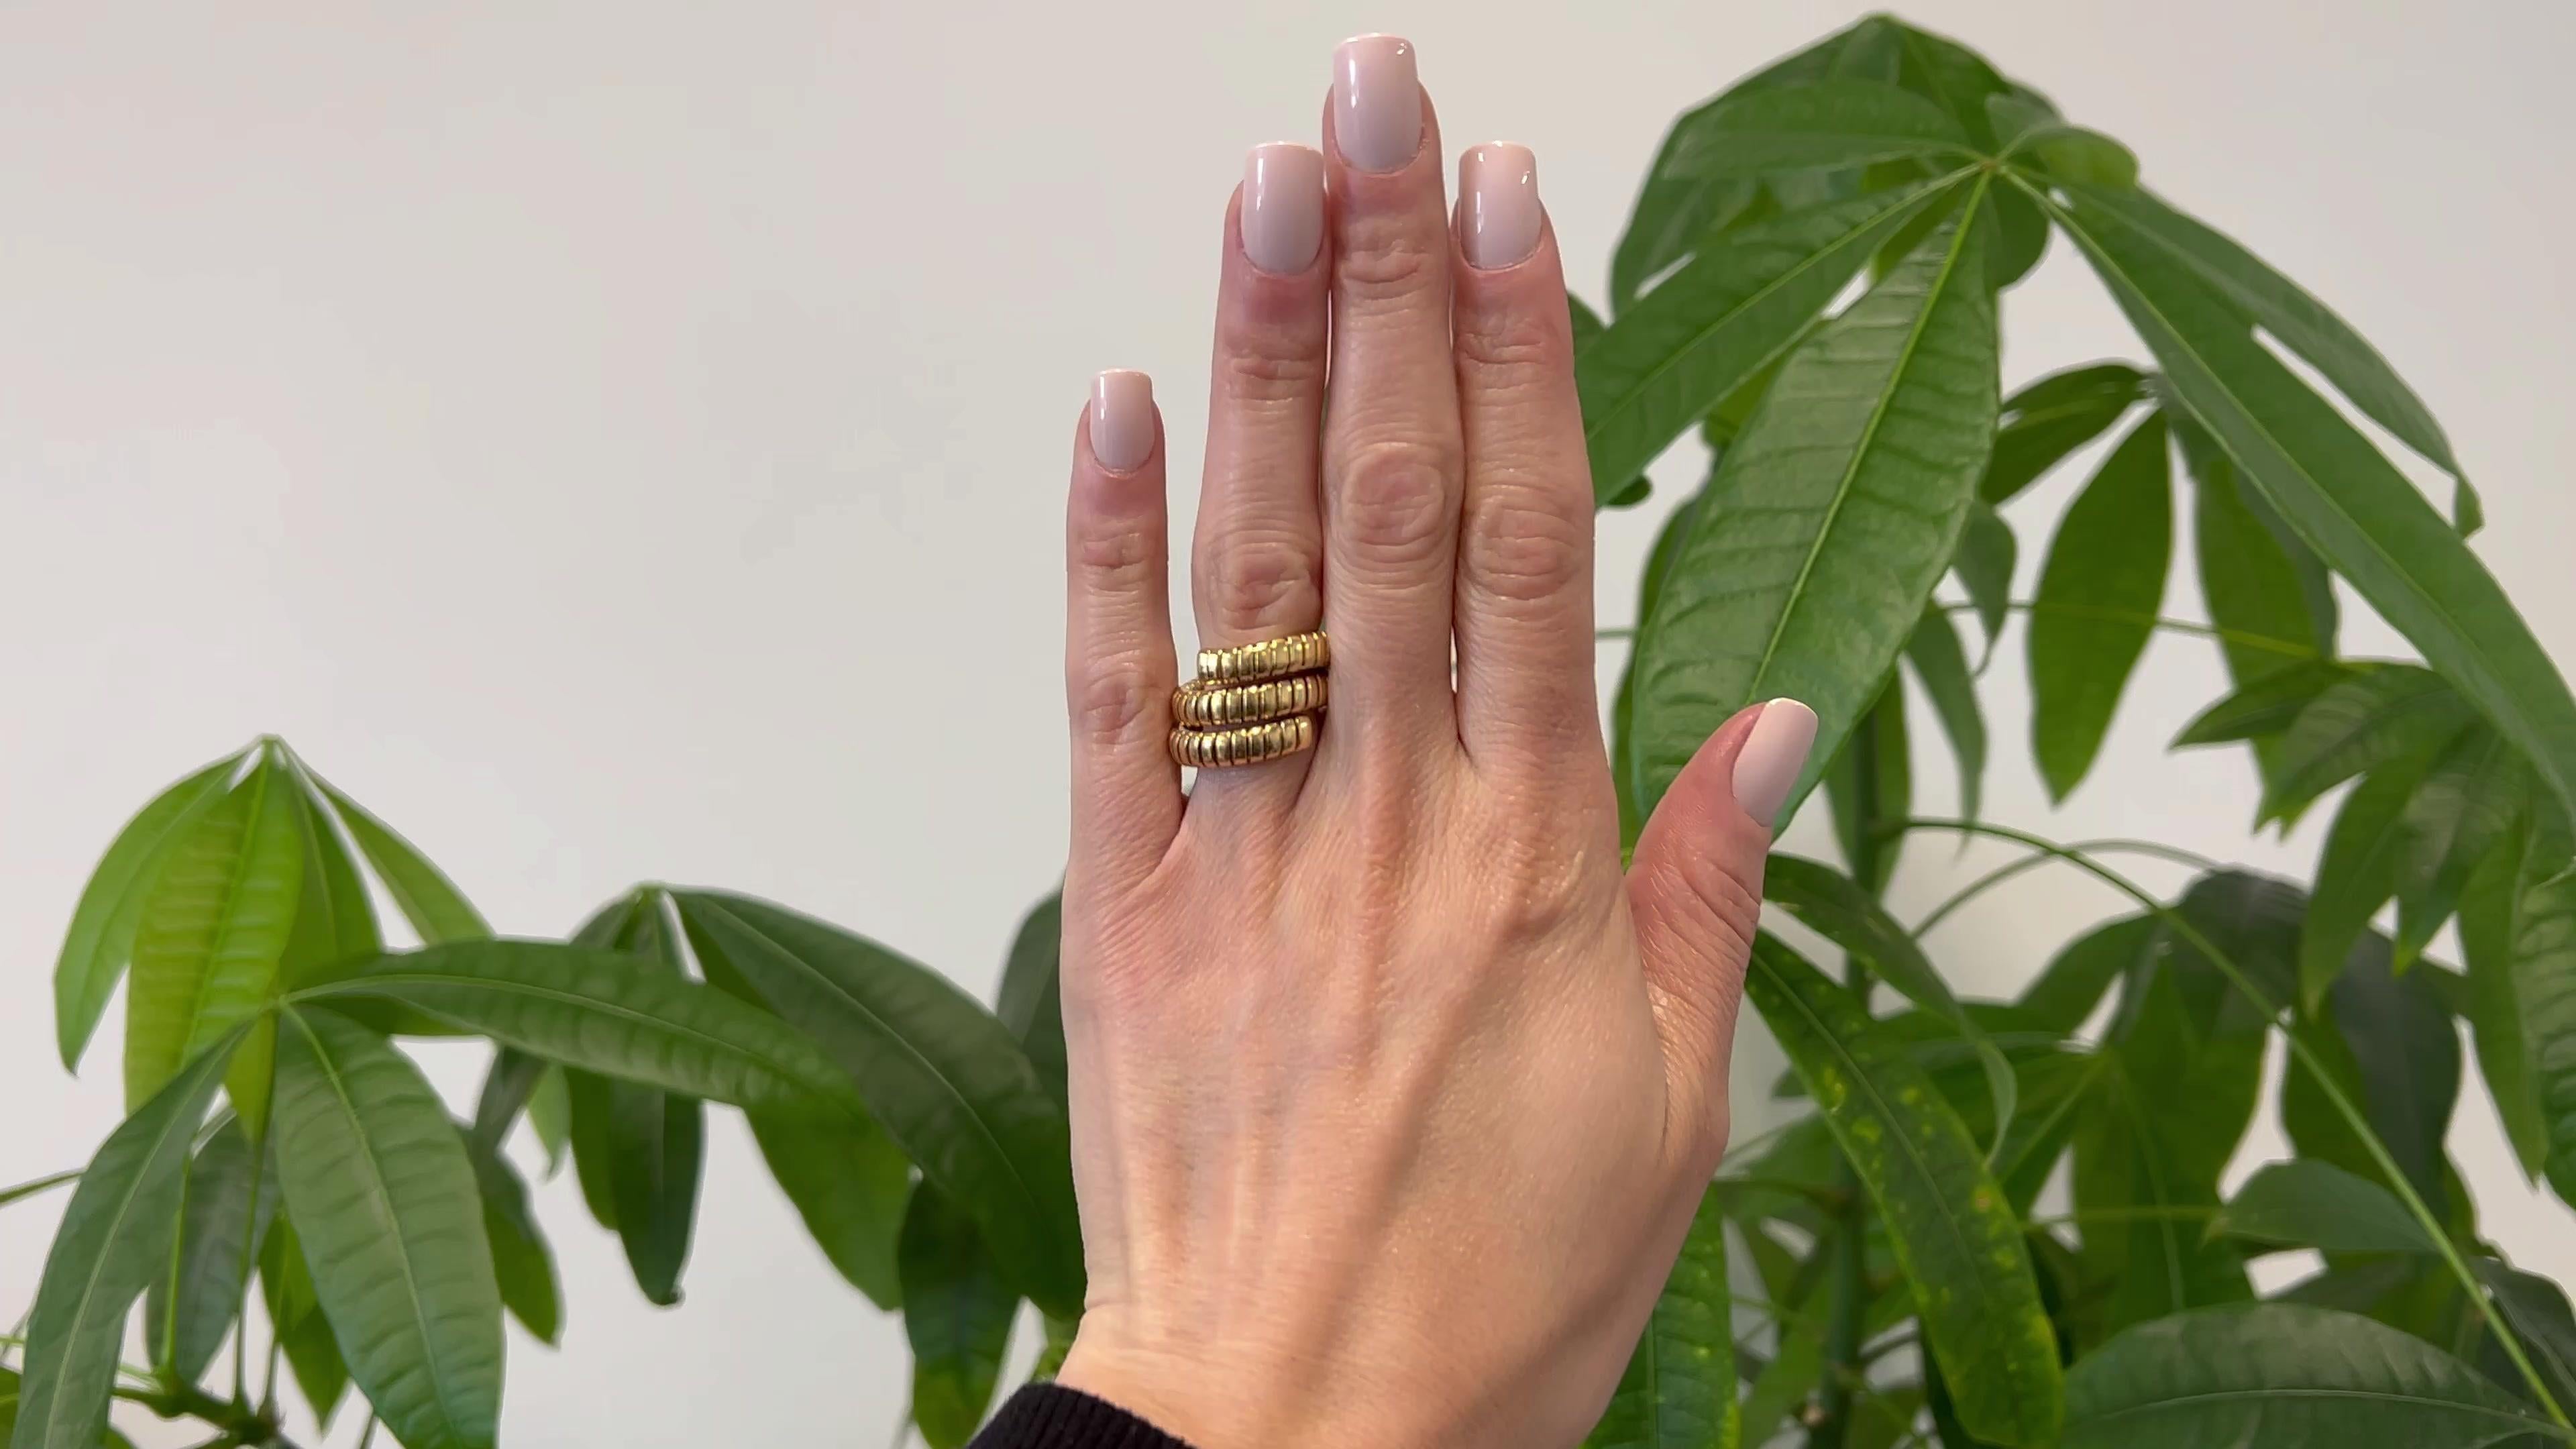 One Vintage Bvlgari 18k Yellow Gold Tubogas Wrap Ring. Crafted in 18-karat yellow gold signed Bvlgari with Italian hallmarks. Circa 1990. The ring is a size 7 and is slightly adjustable due to the flexible tubogas wrap band.

About this Item: